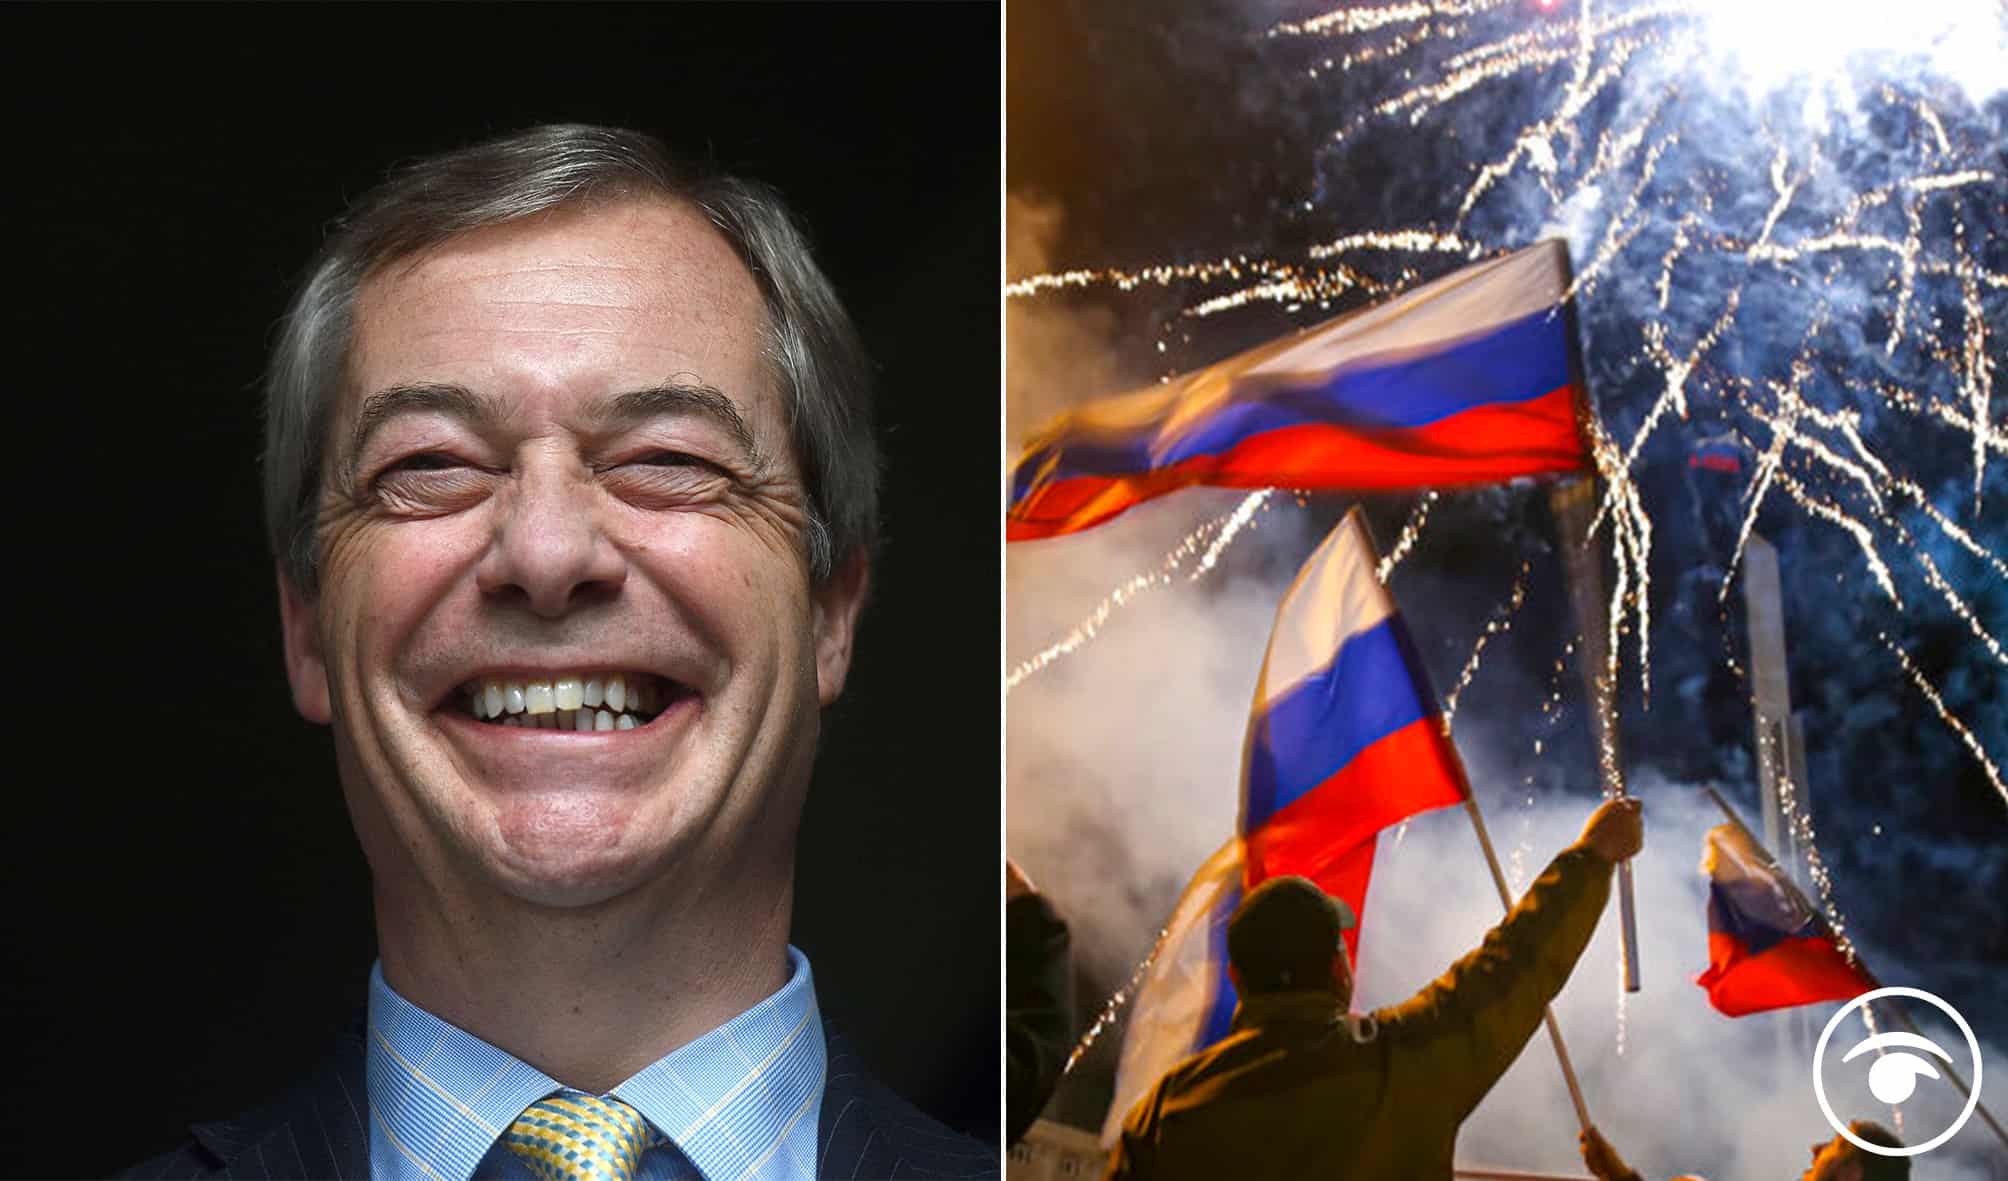 Watch: Farage accused of ‘colluding’ with Putin during his time in European Parliament